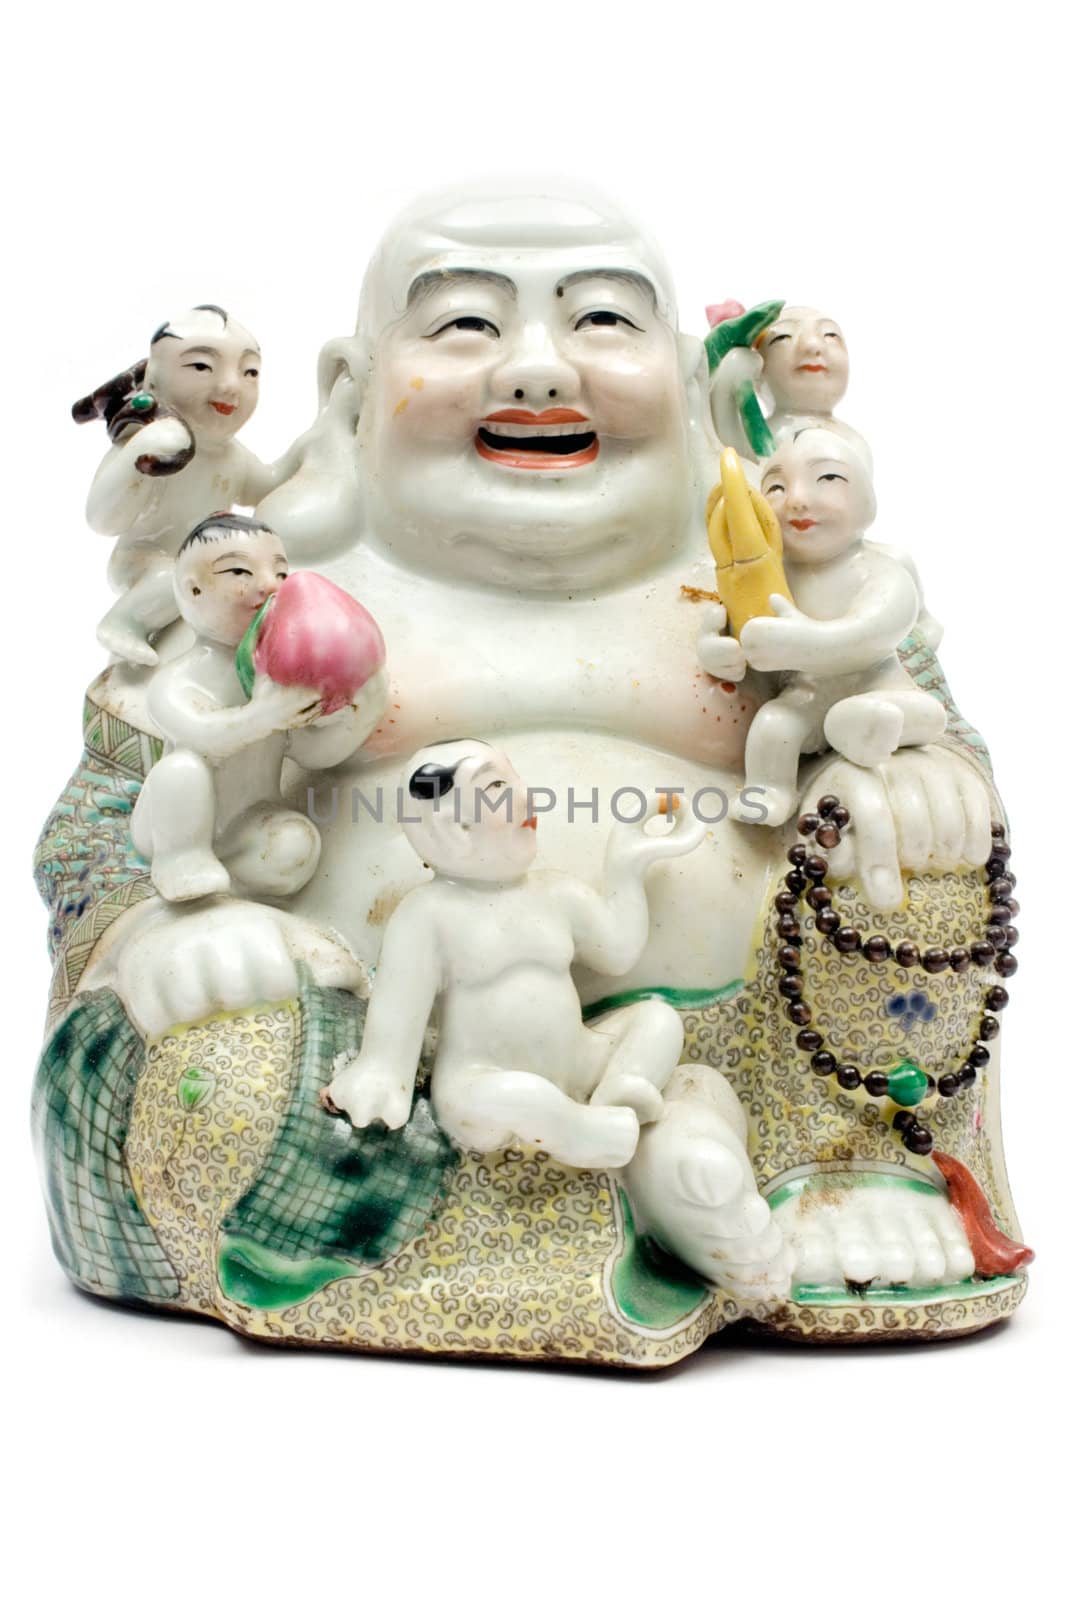 Colorful Porcelain Buddha by winterling